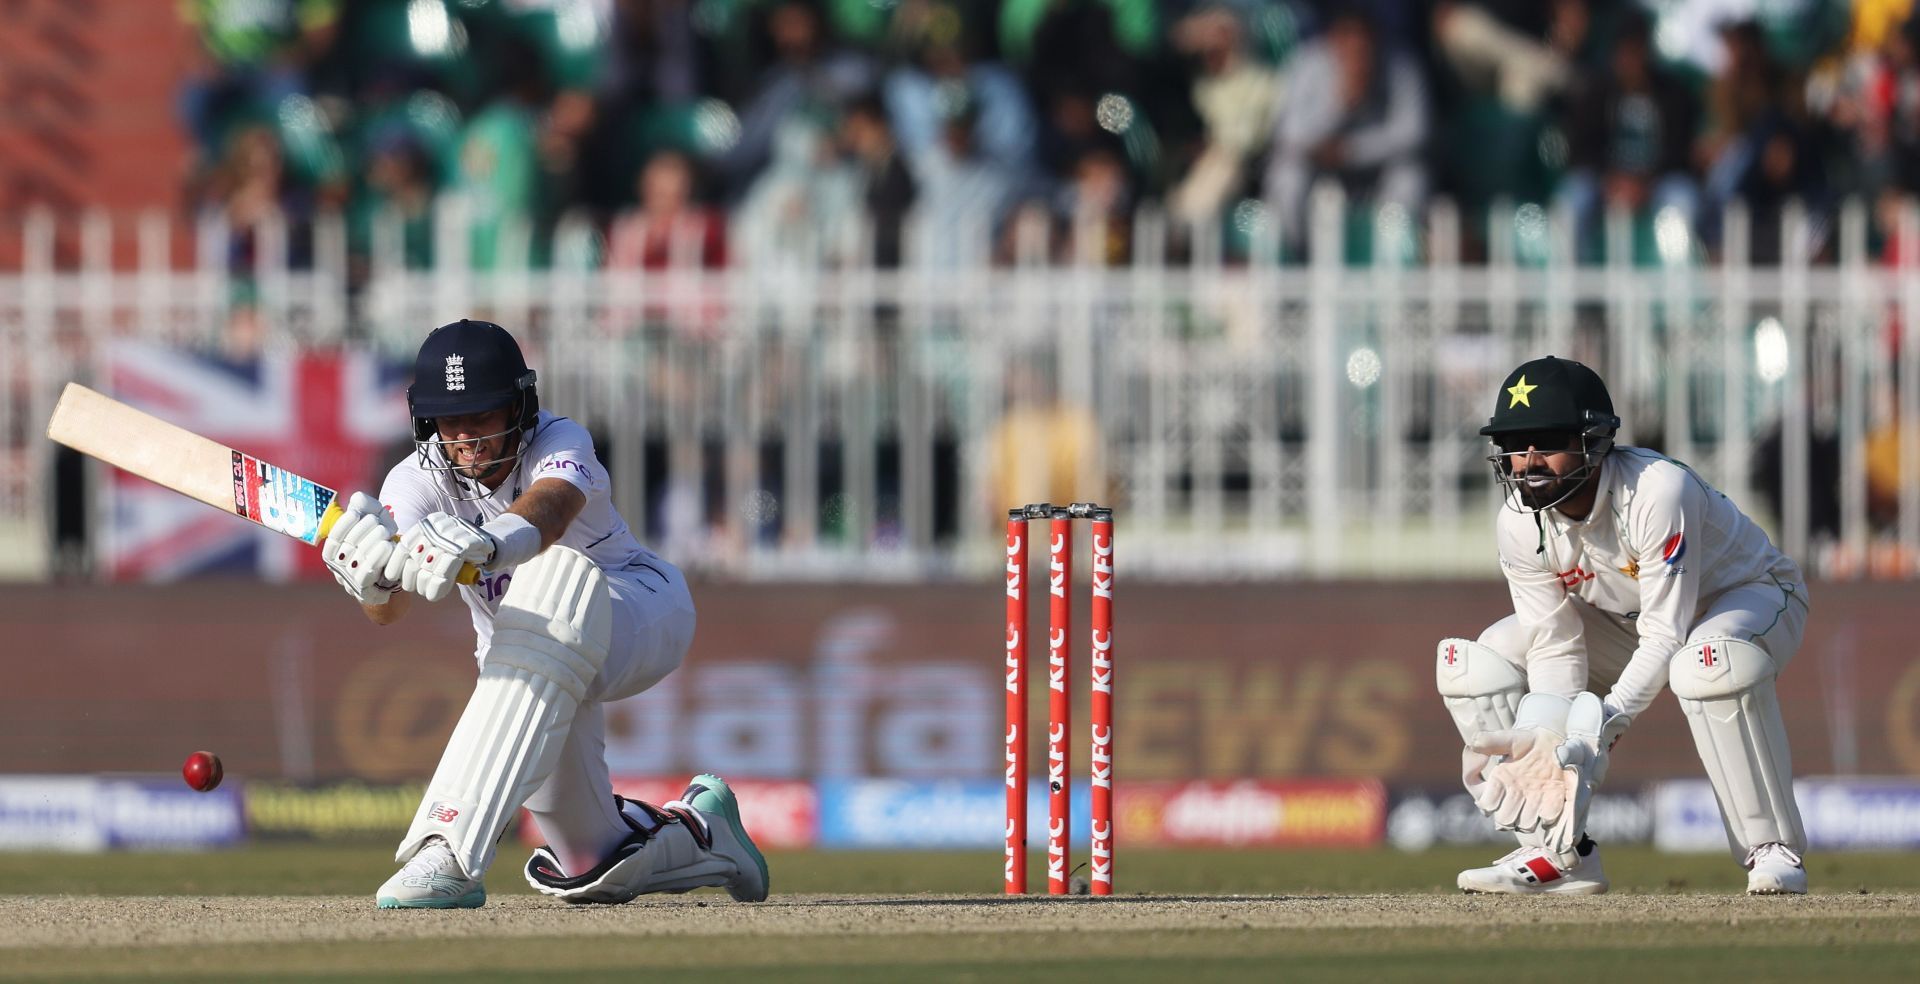 The former England captain played a fine knock in the Rawalpindi Test. (Pic: Getty Images)